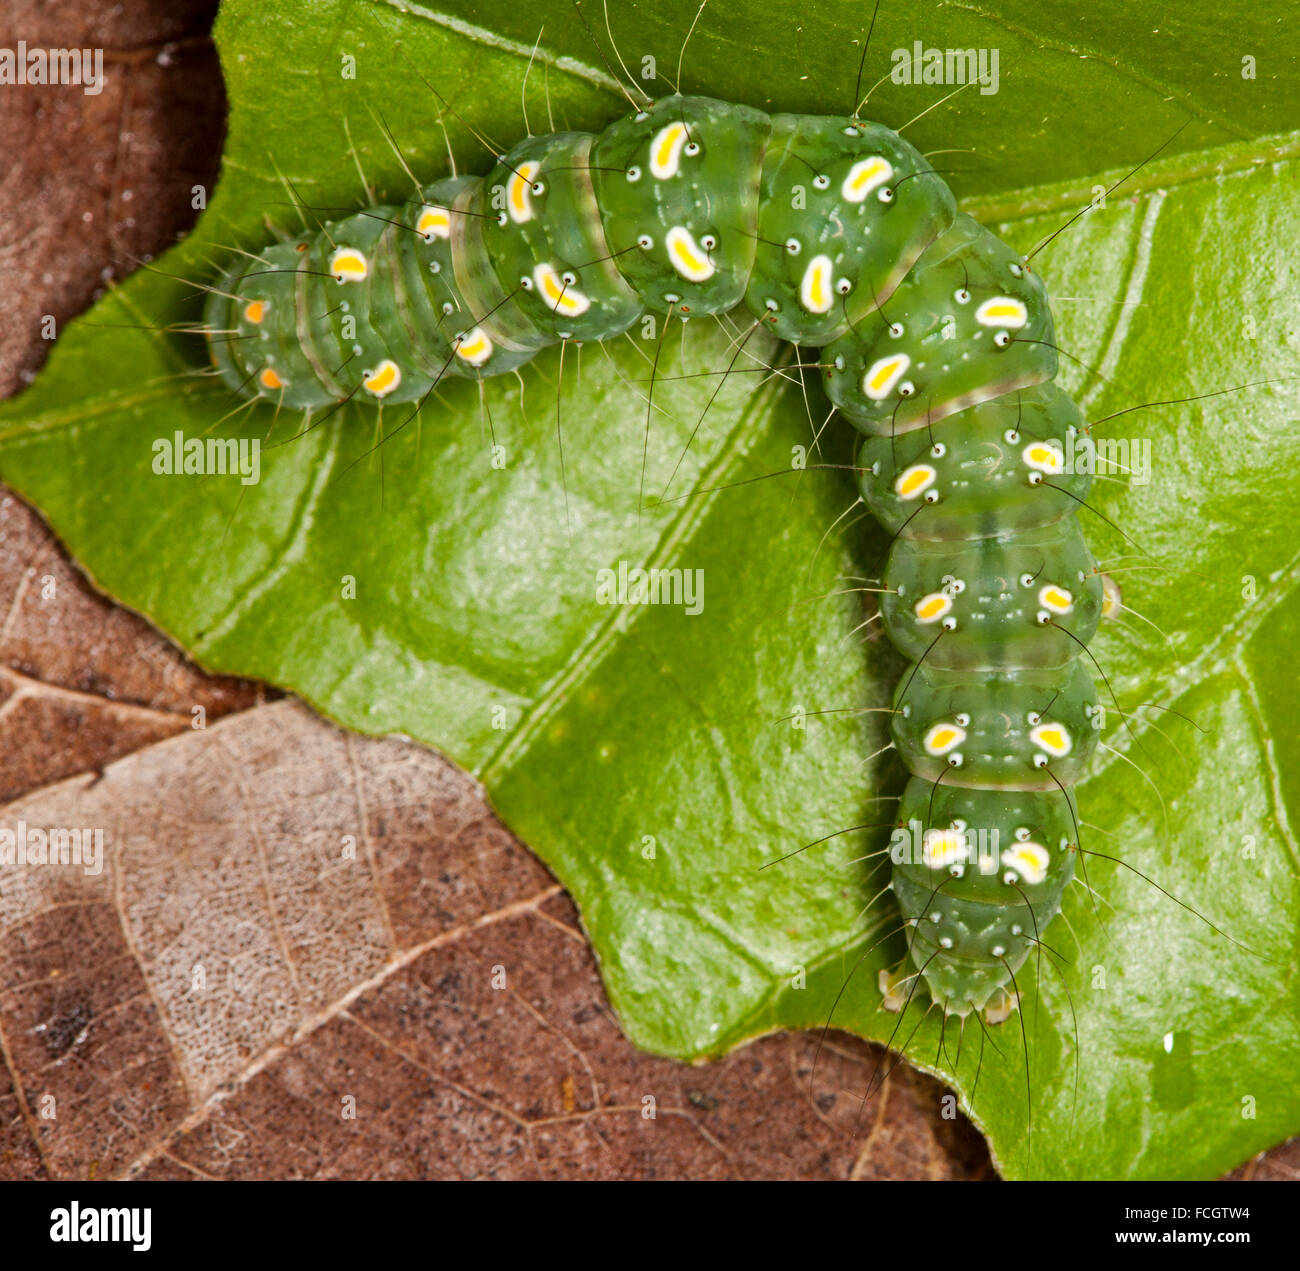 Colourful green caterpillar with pale yellow spots, larva of transverse moth, Xanthodes transversa on leaf of hibiscus in Australian garden Stock Photo